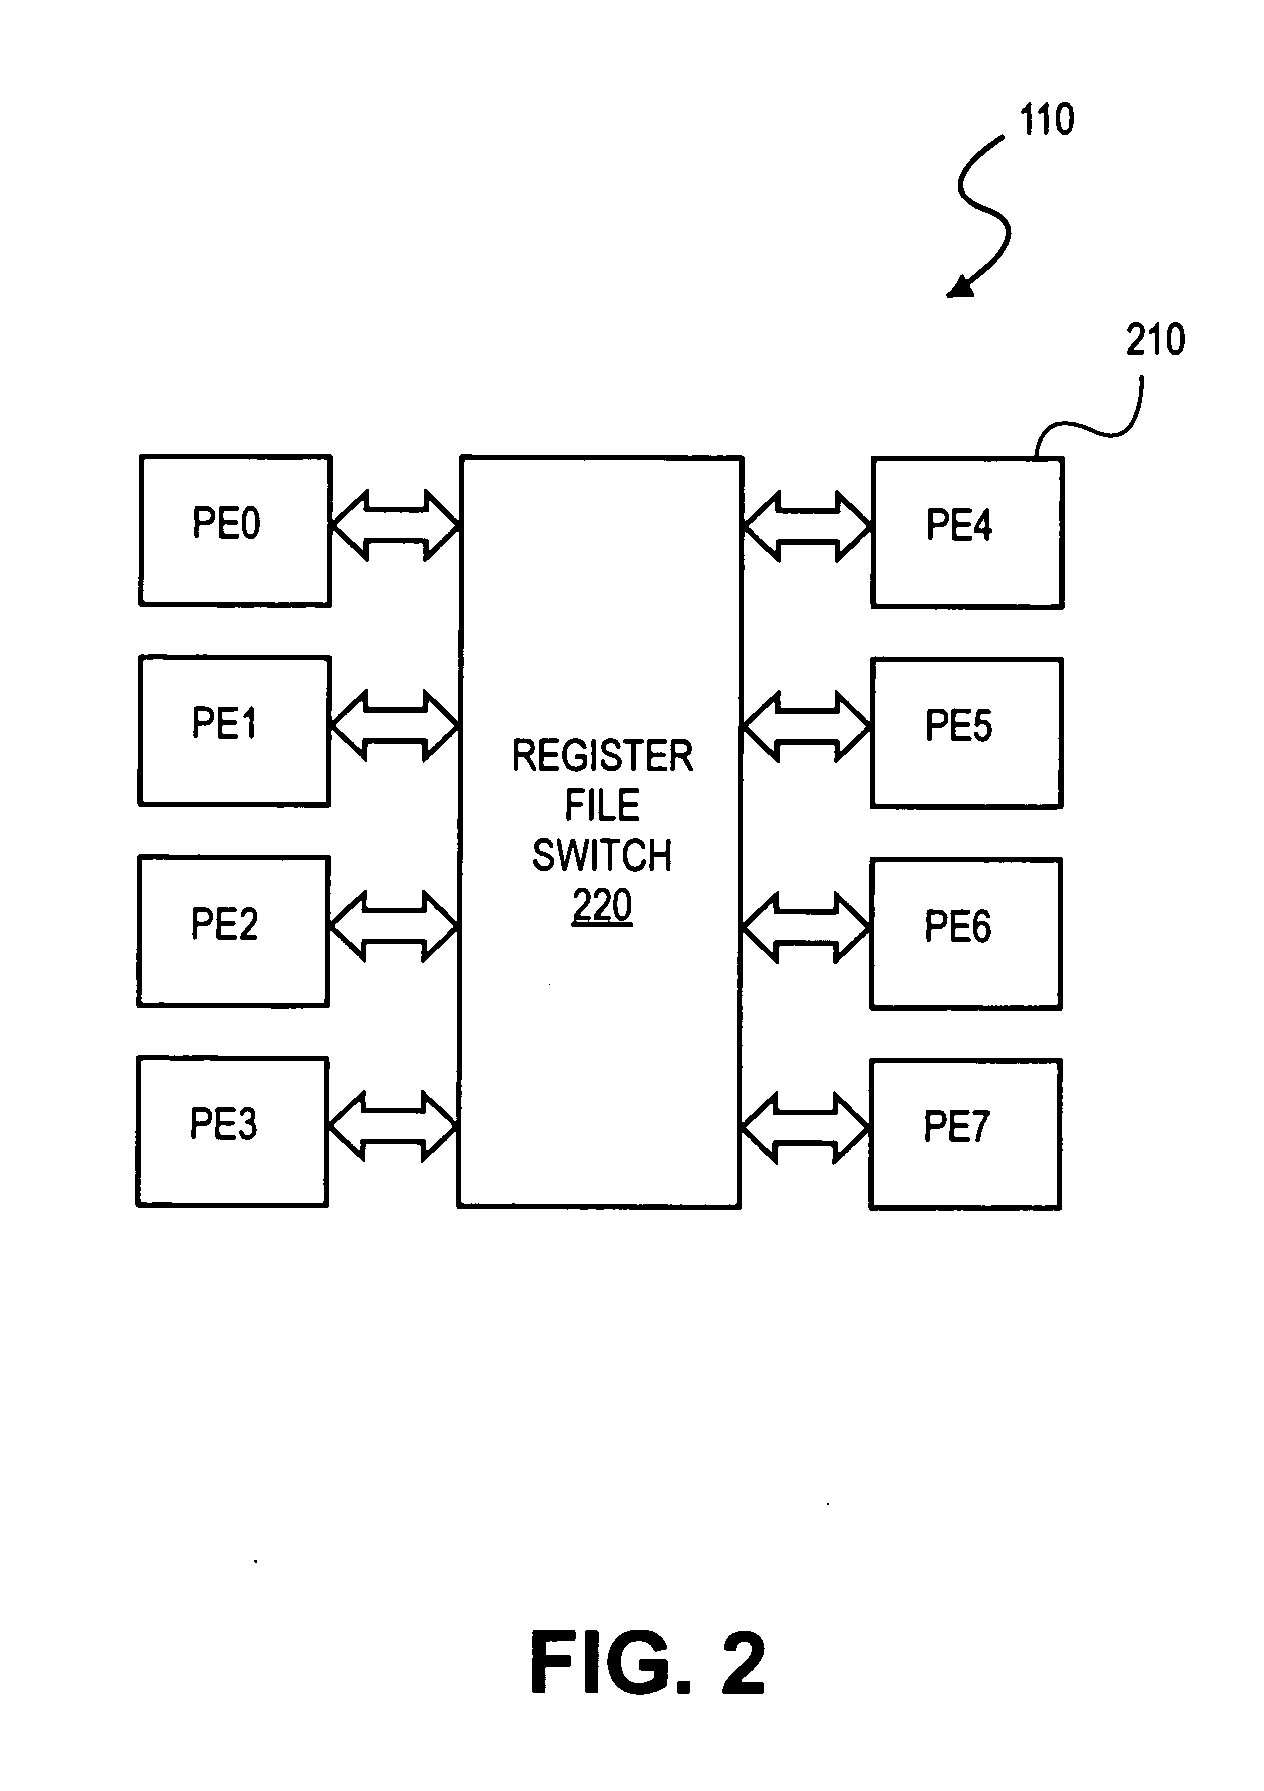 Method and apparatus for multiprocessor debug support